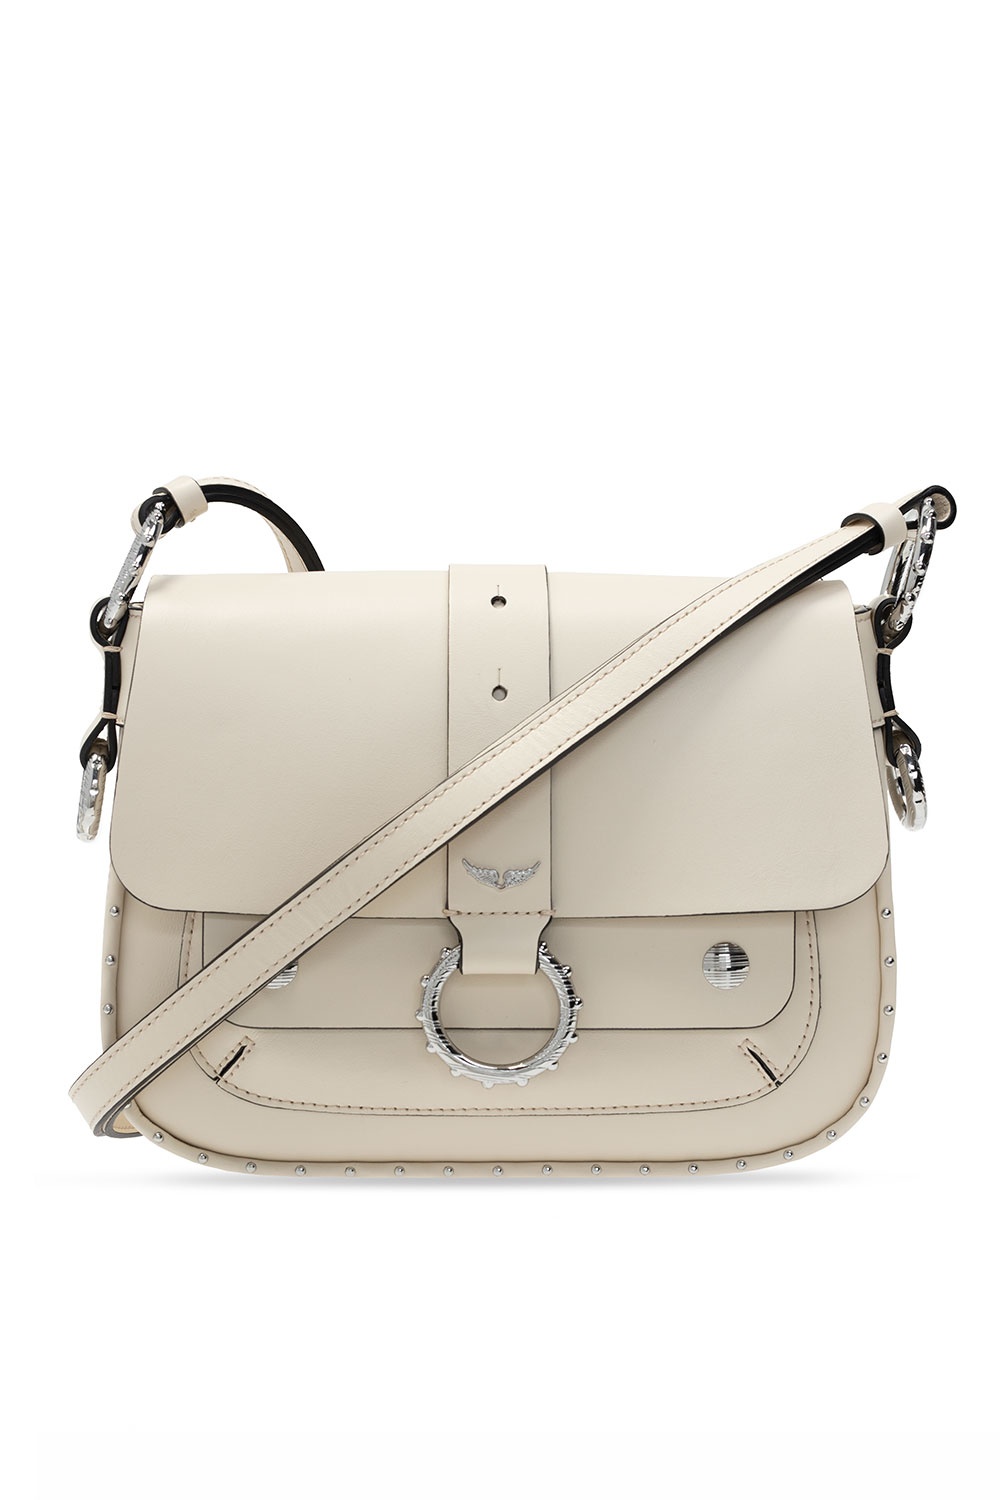 Zadig & Voltaire - MUST HAVE - KATE BAG Discover the new bag